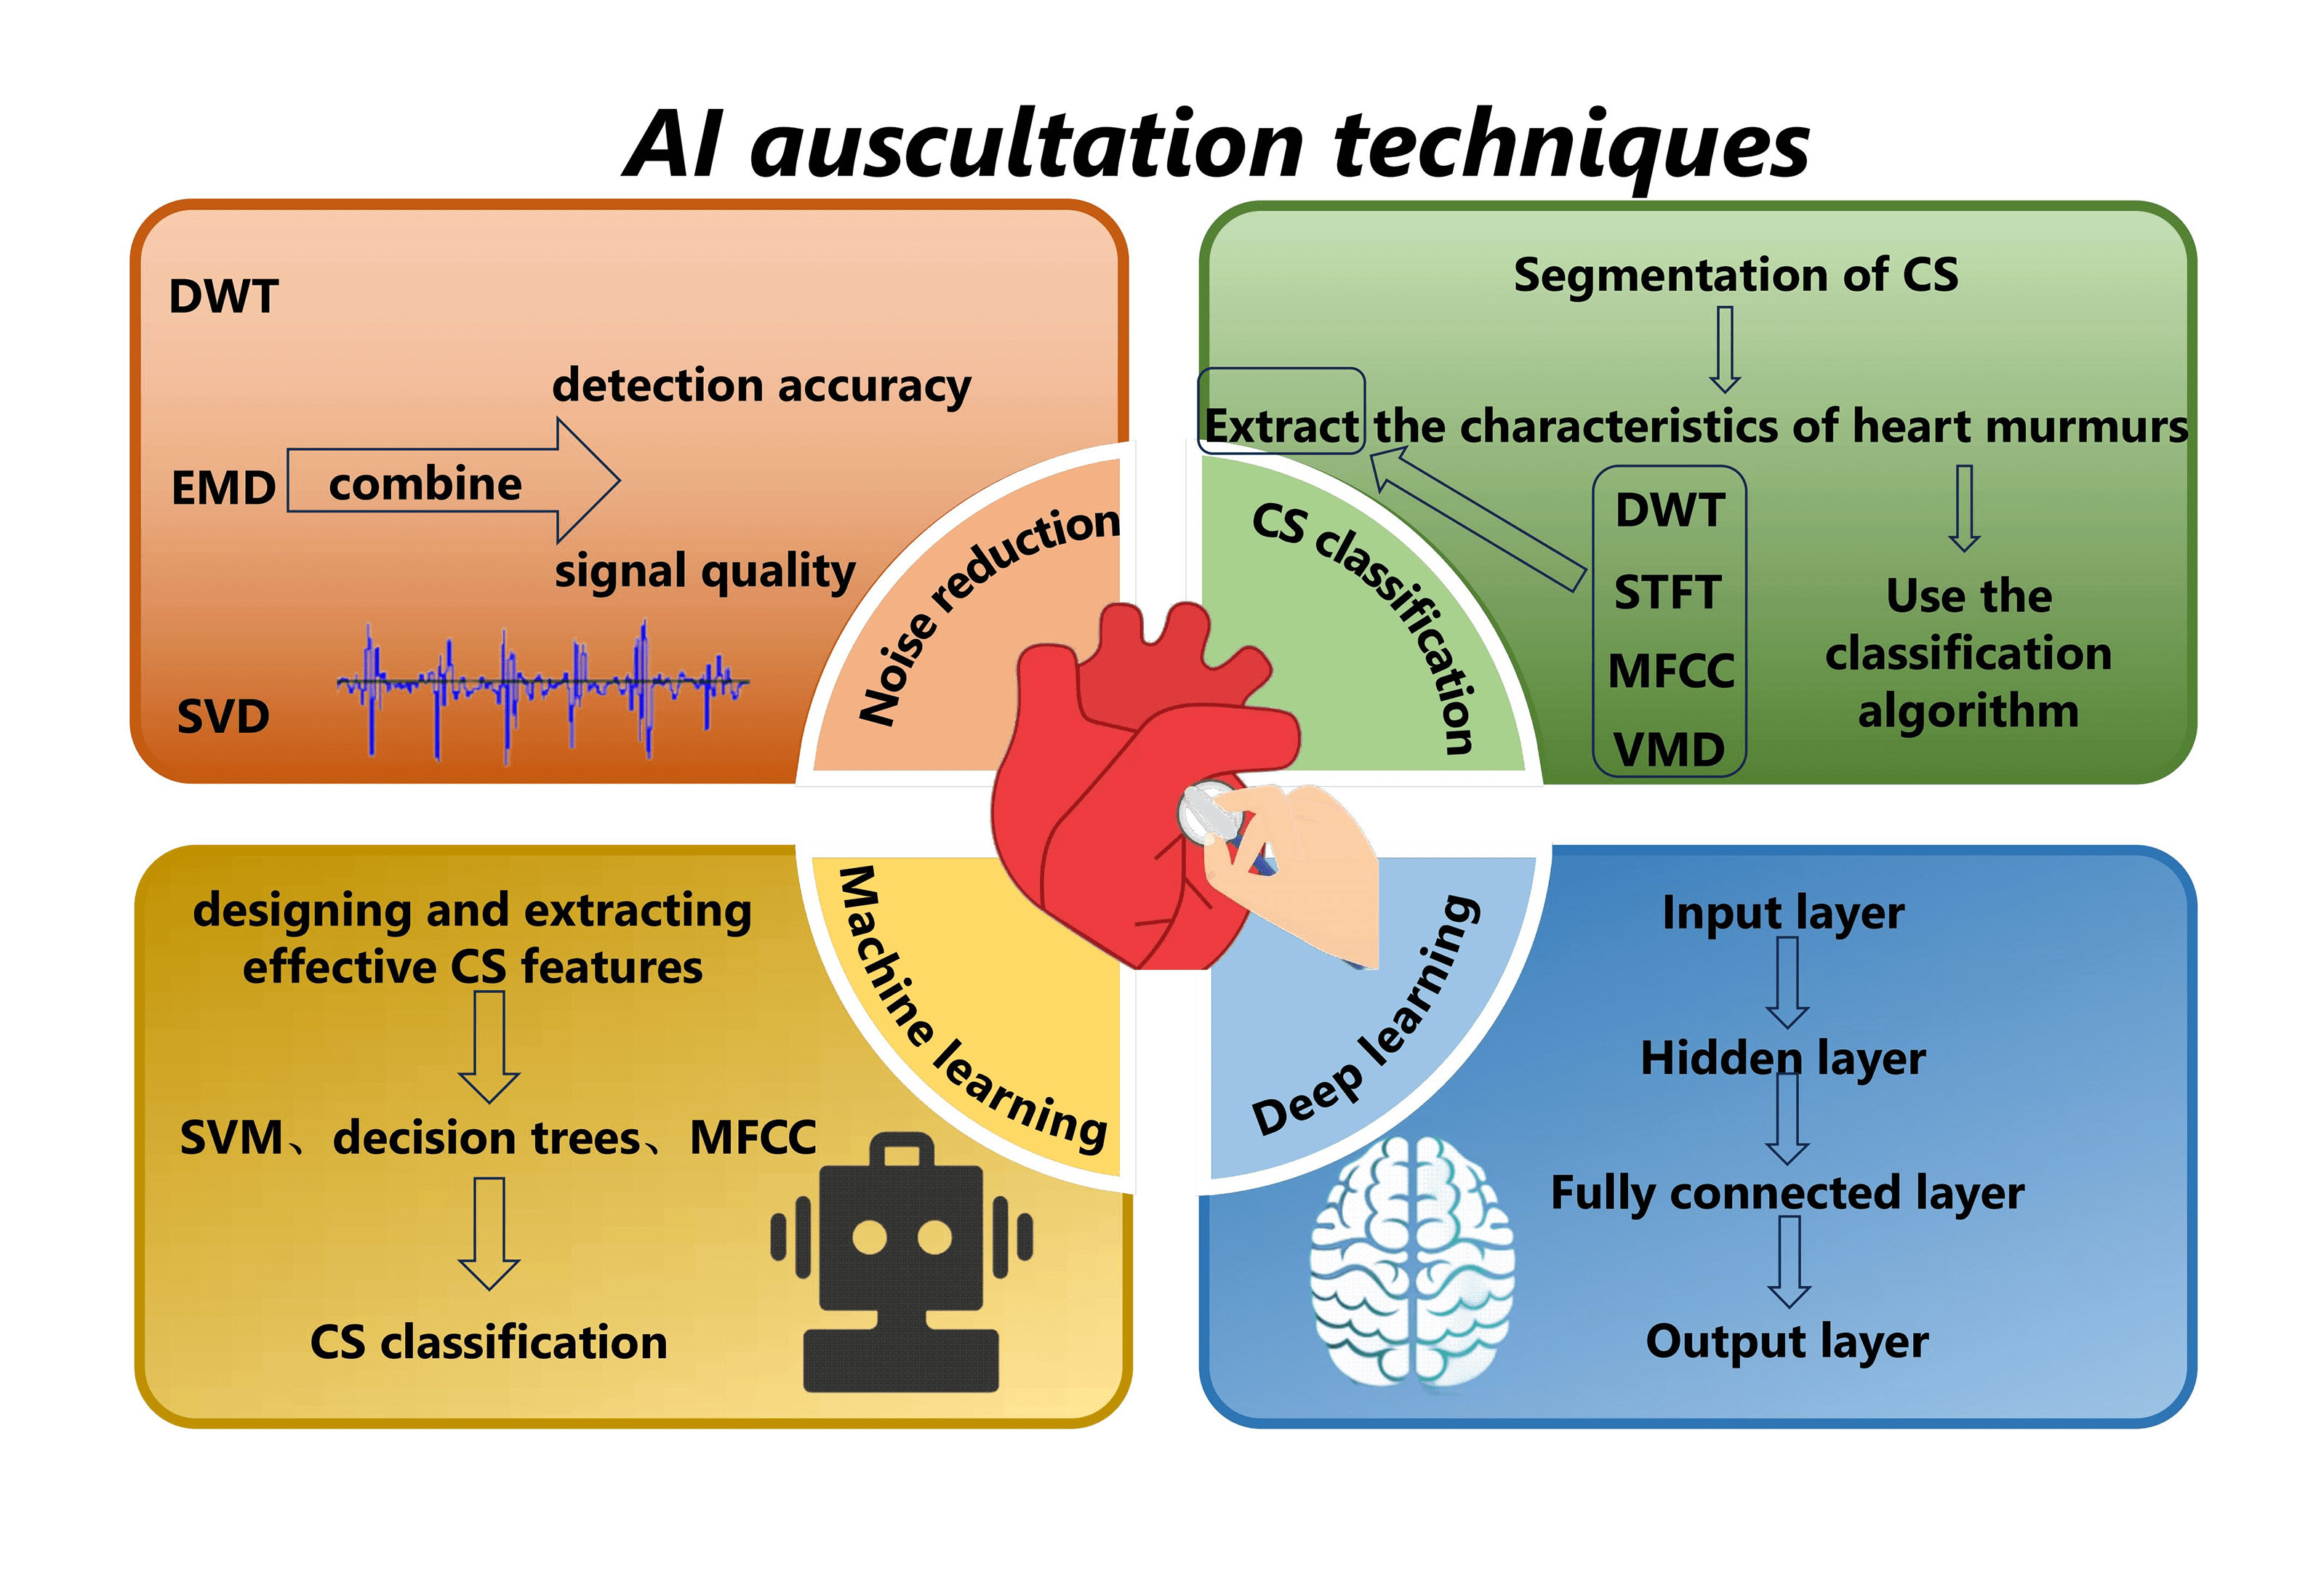 Machine Learning-Based Intelligent Auscultation Techniques in Congenital Heart Disease: Application and Development